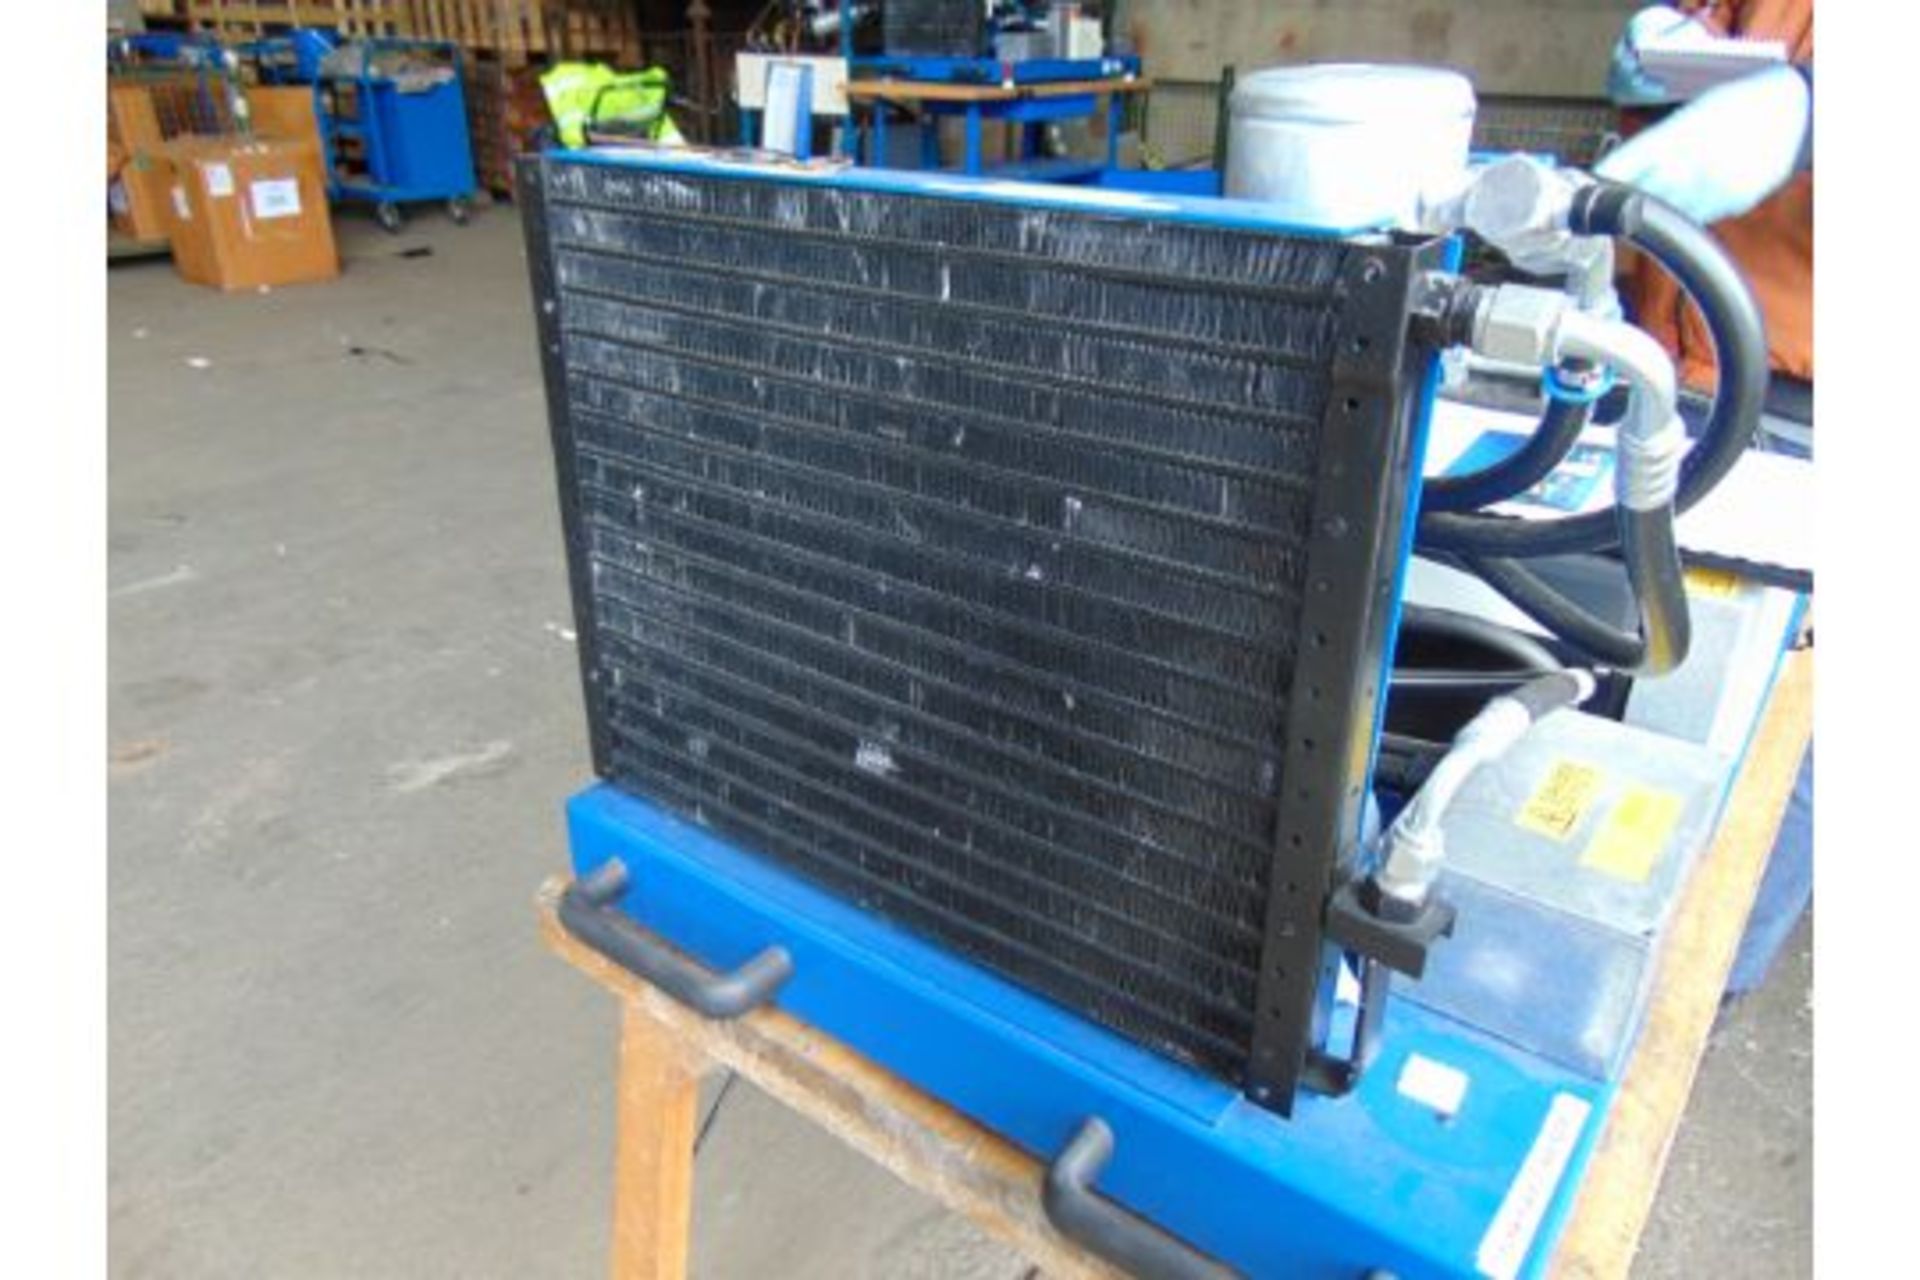 FS200 MK9 Air Conditioning Unit From MoD c/w Instructions etc - Image 11 of 14